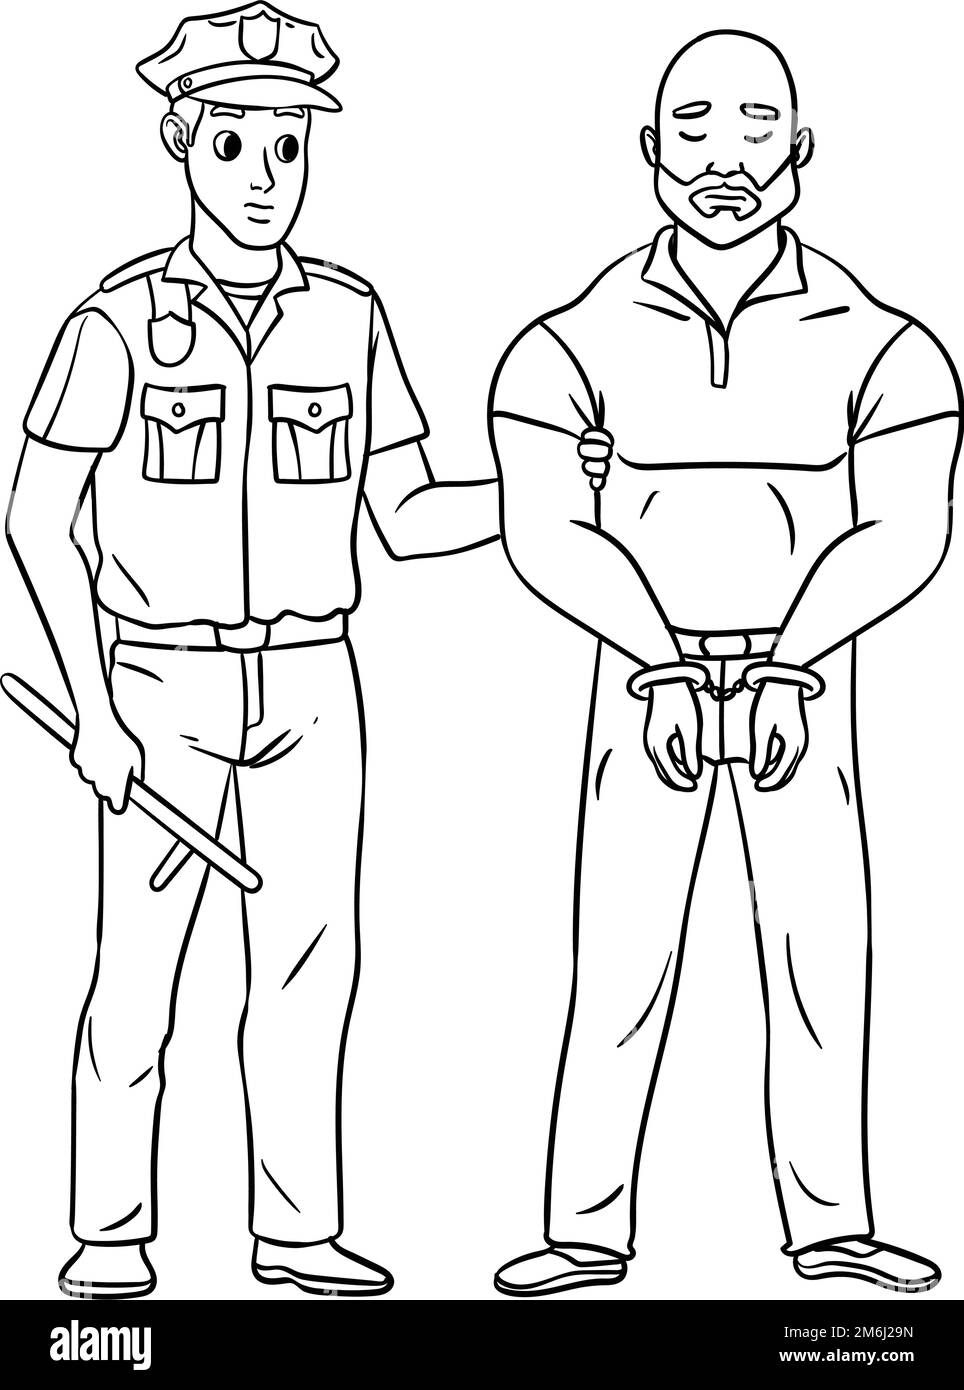 Corrections Officer Isolated Coloring Page  Stock Vector